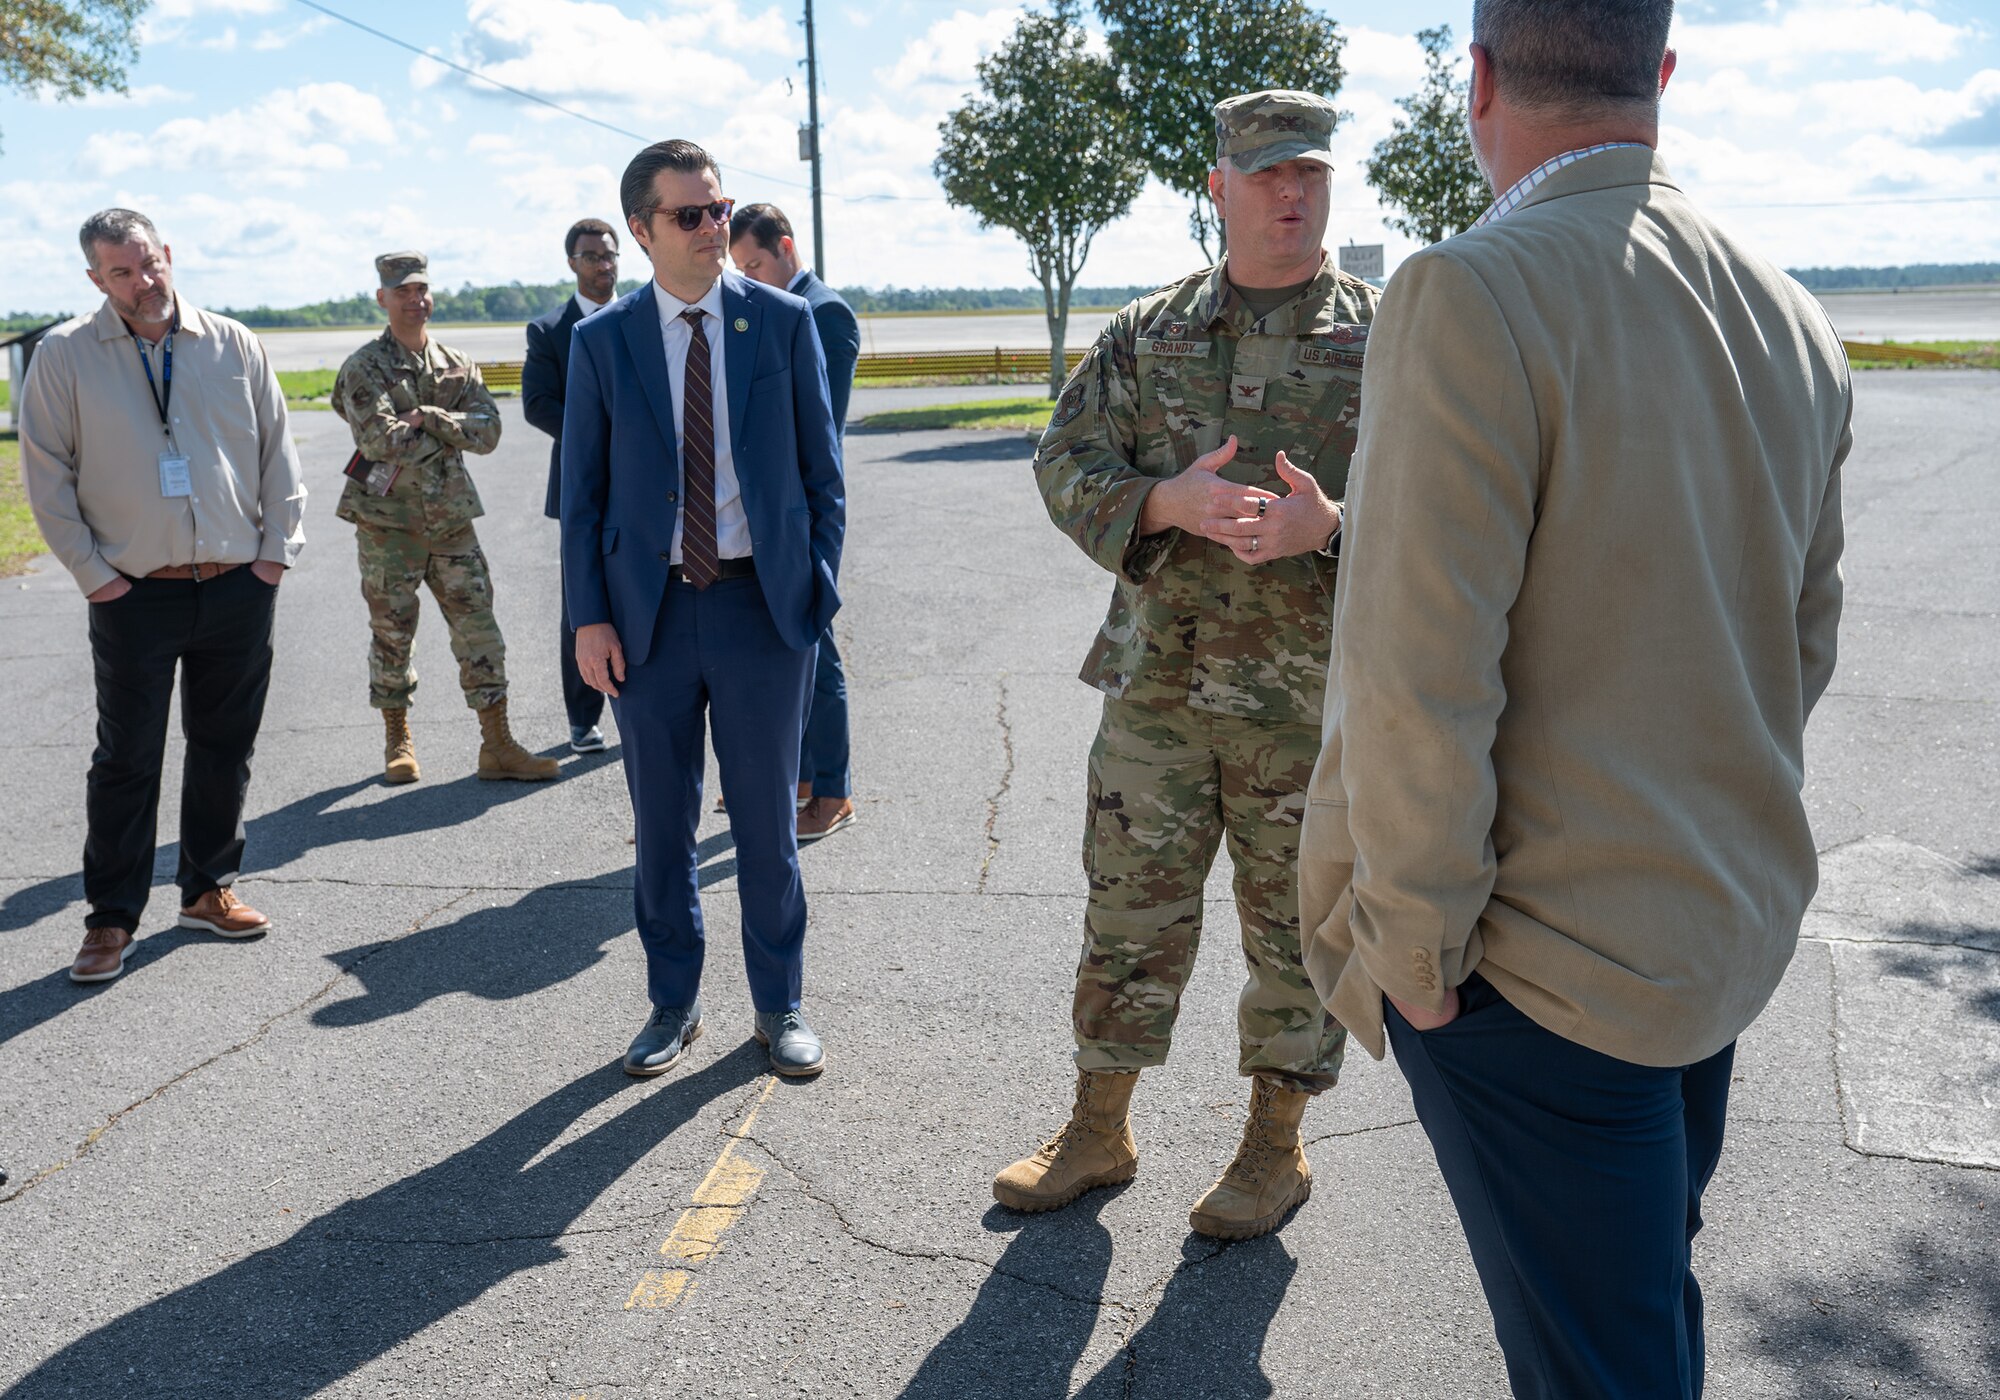 An Air Force military commander, congressman and other senior leadership stand outside in front of a flightline.